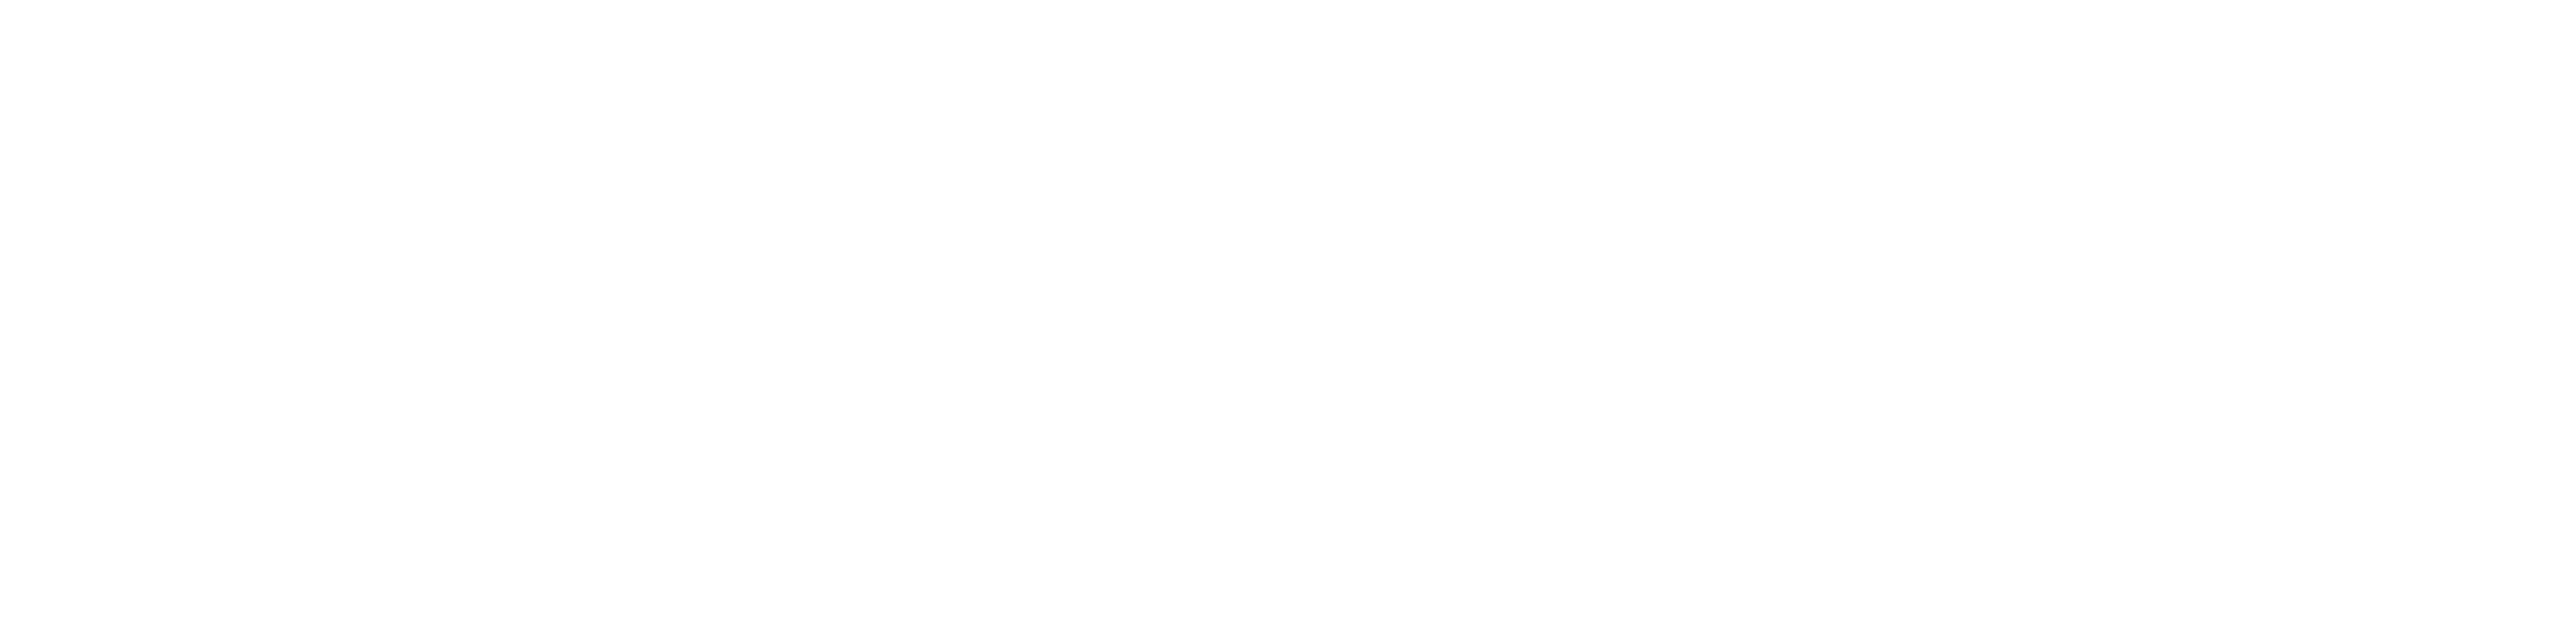 The Labour Market and Information Council's font logo in white text.